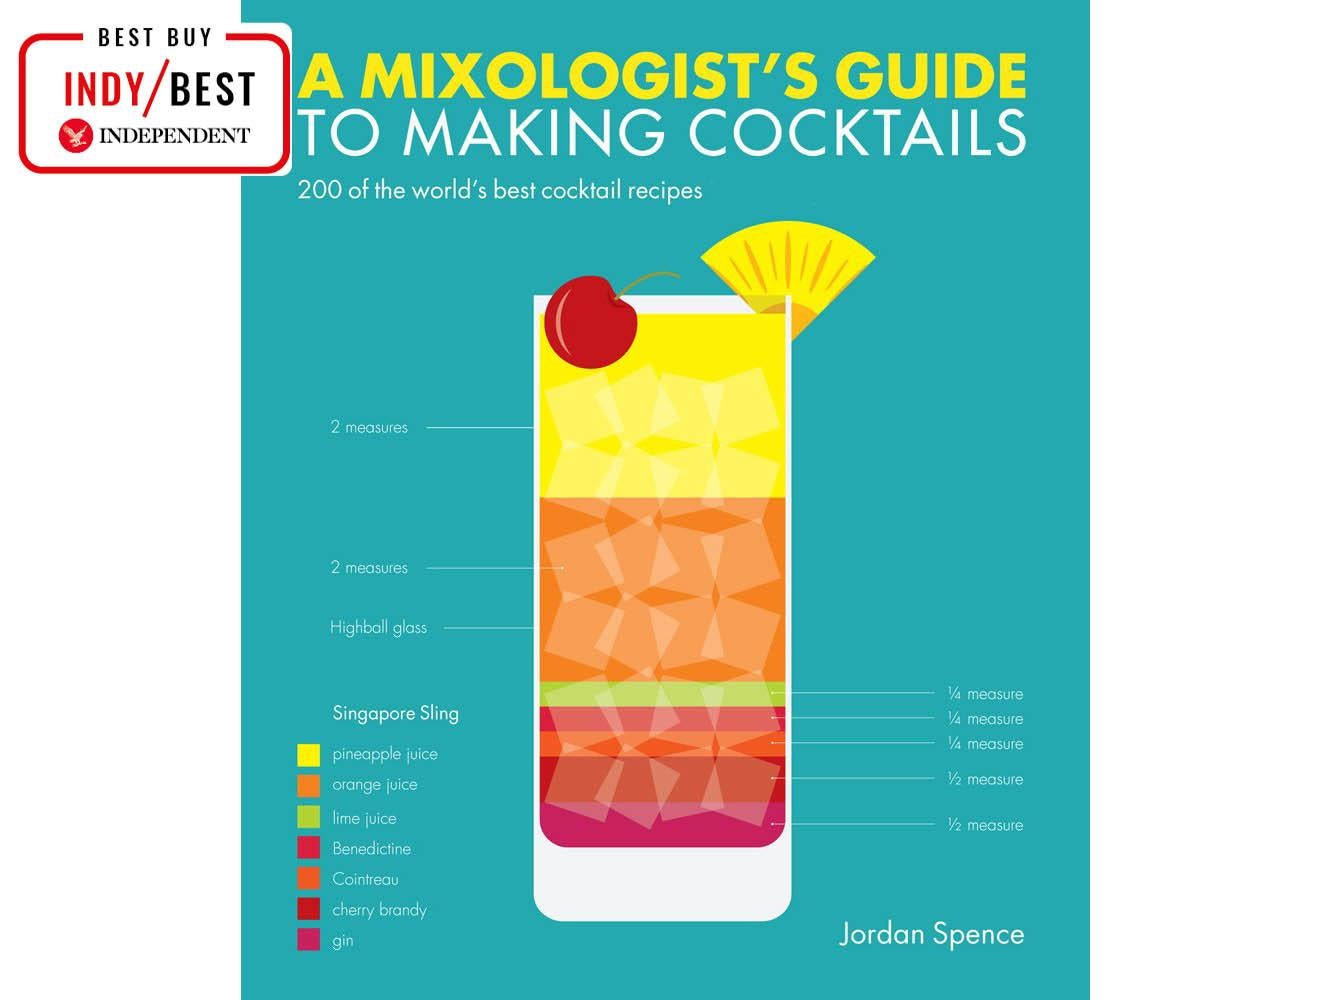 To help you perfect your mixology skills, try following step-by-step instructions from a recipe book